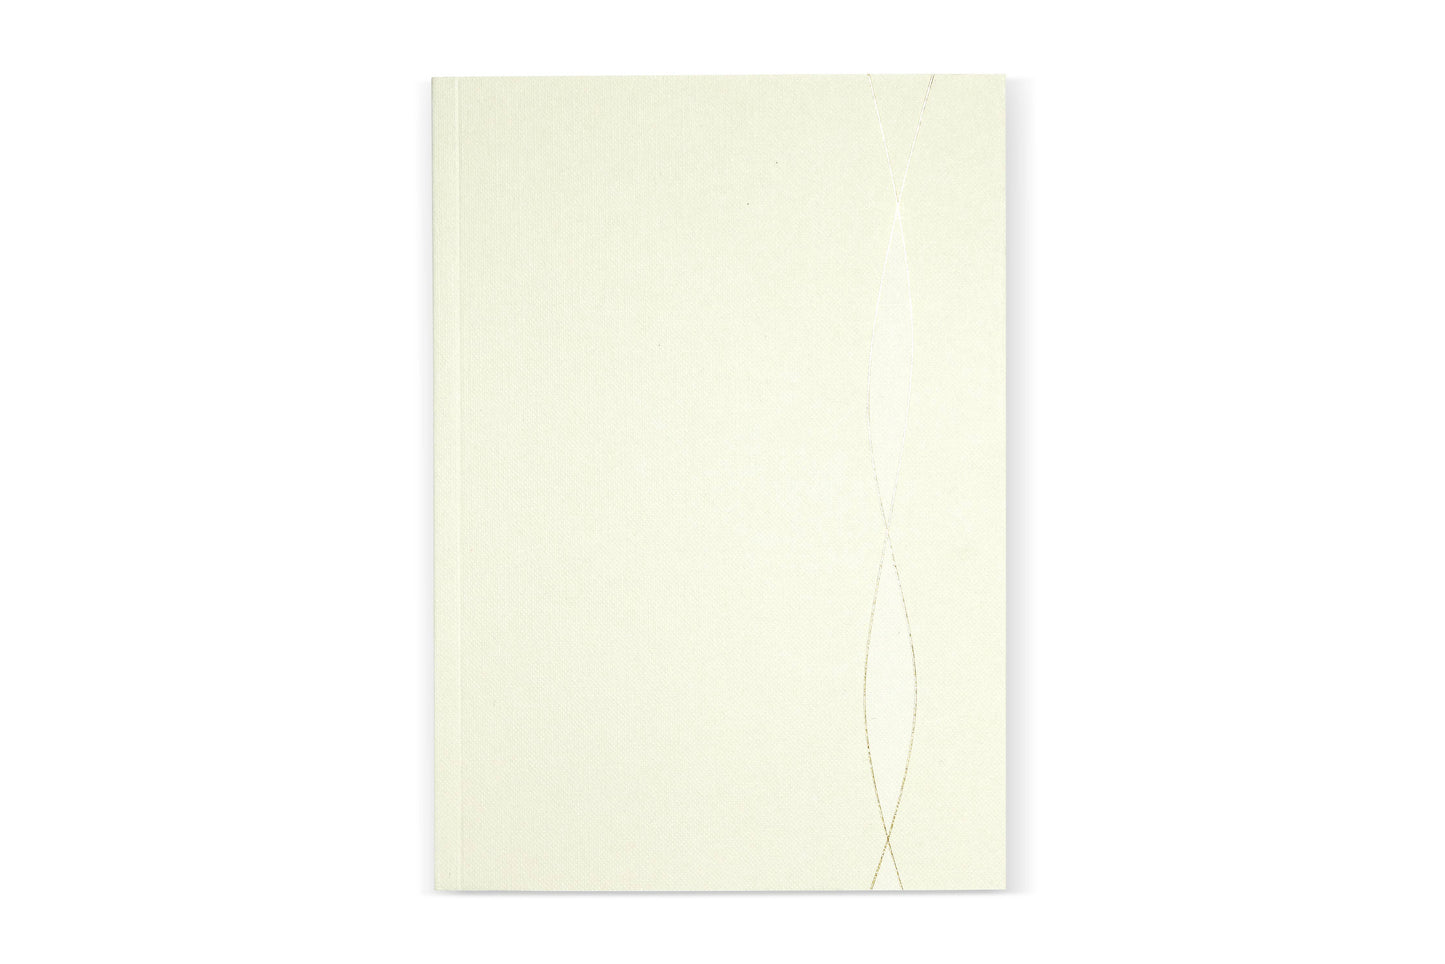 A5 Lined Notebooks in Mist, Ruled Notepads, Stationery